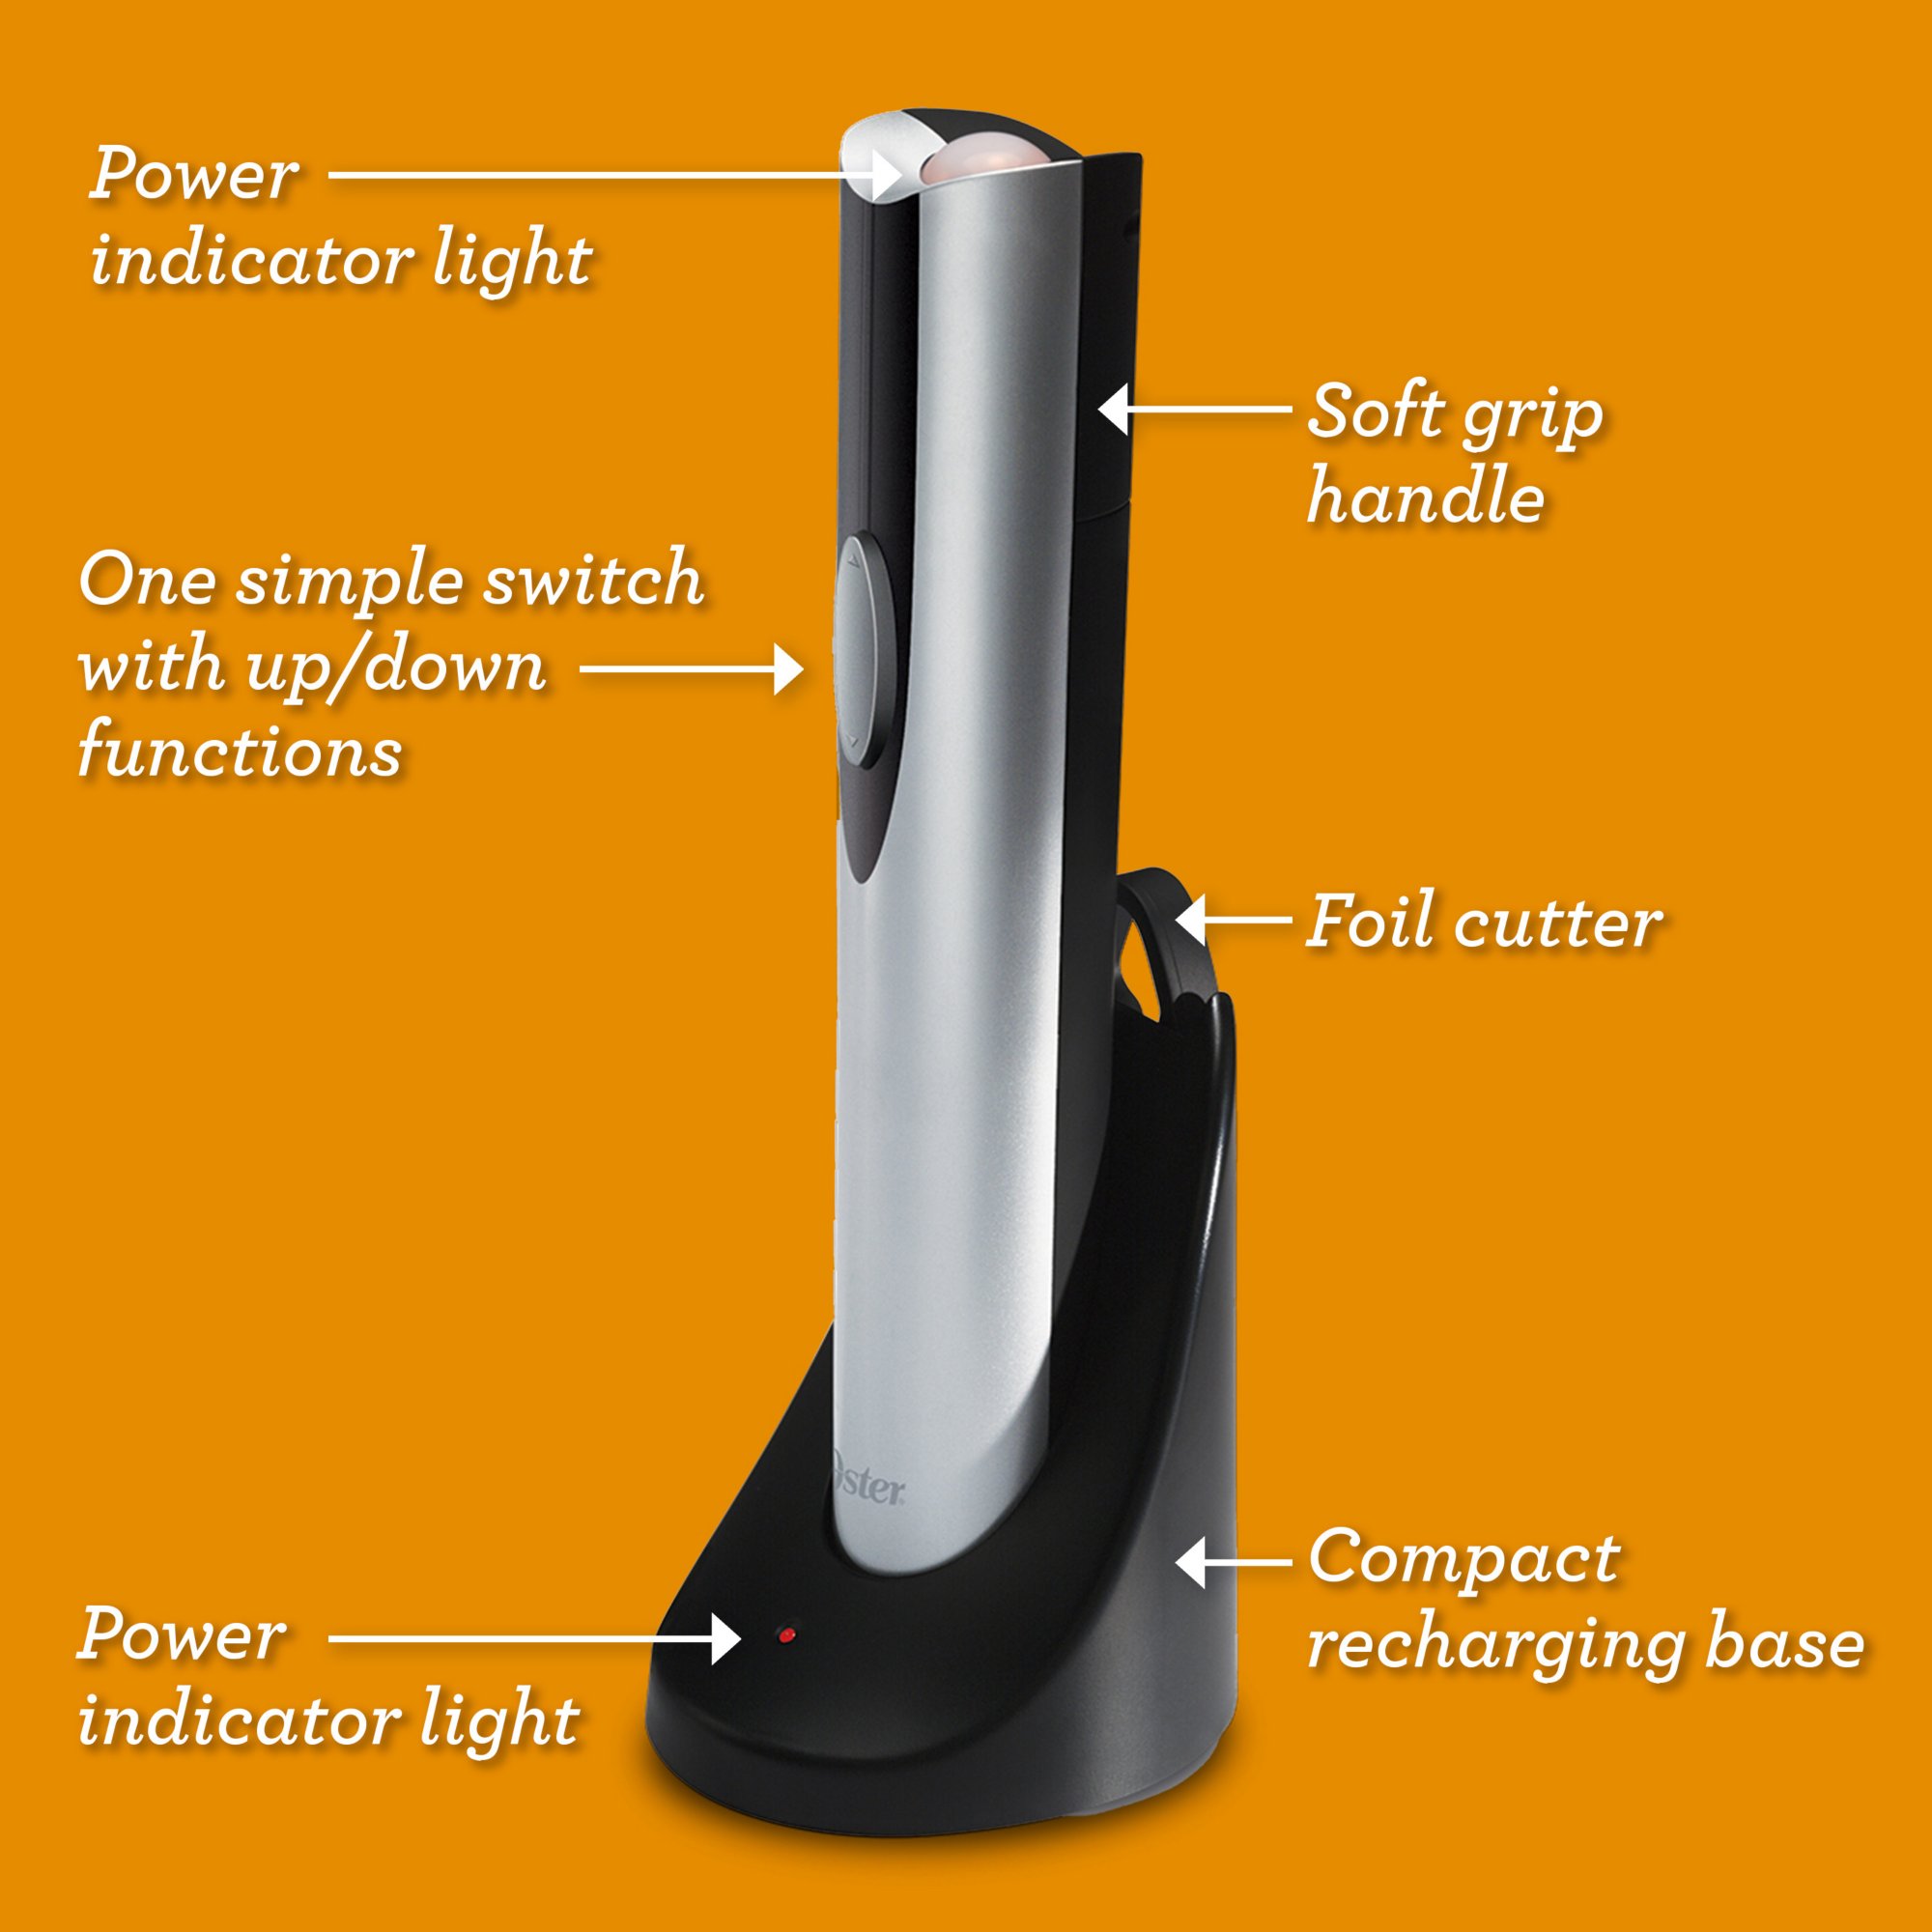 Oster Cordless Electric Wine Bottle: It Does What It's Supposed to Do